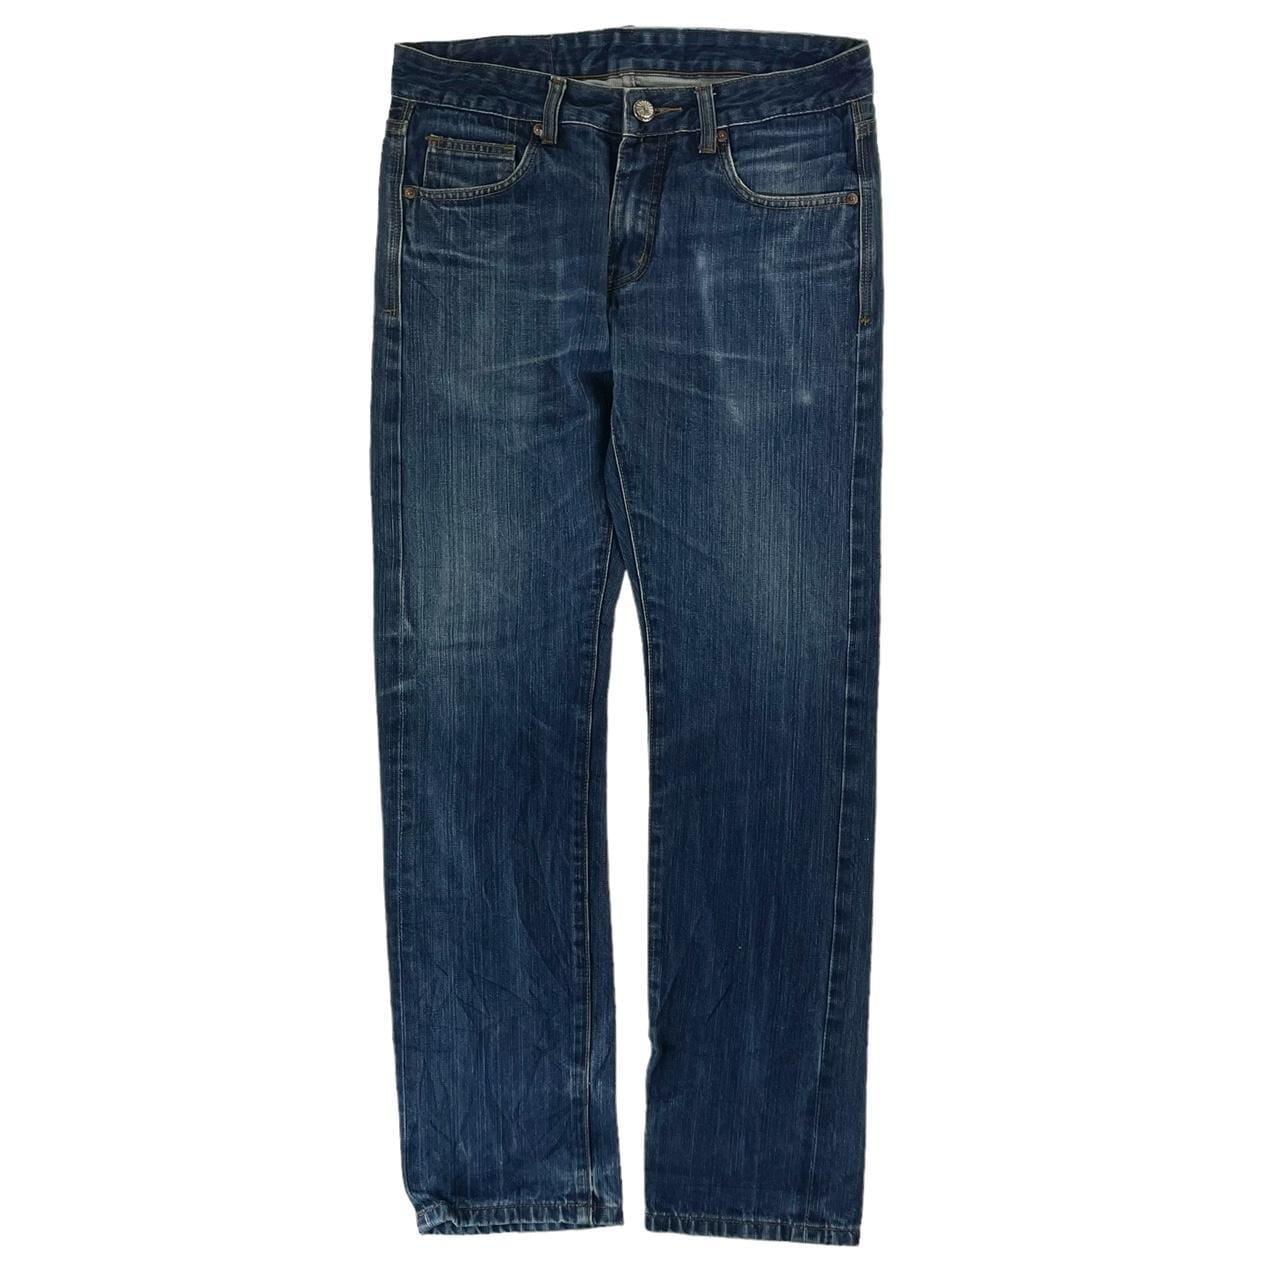 Faces denim jeans trousers W32 - Known Source